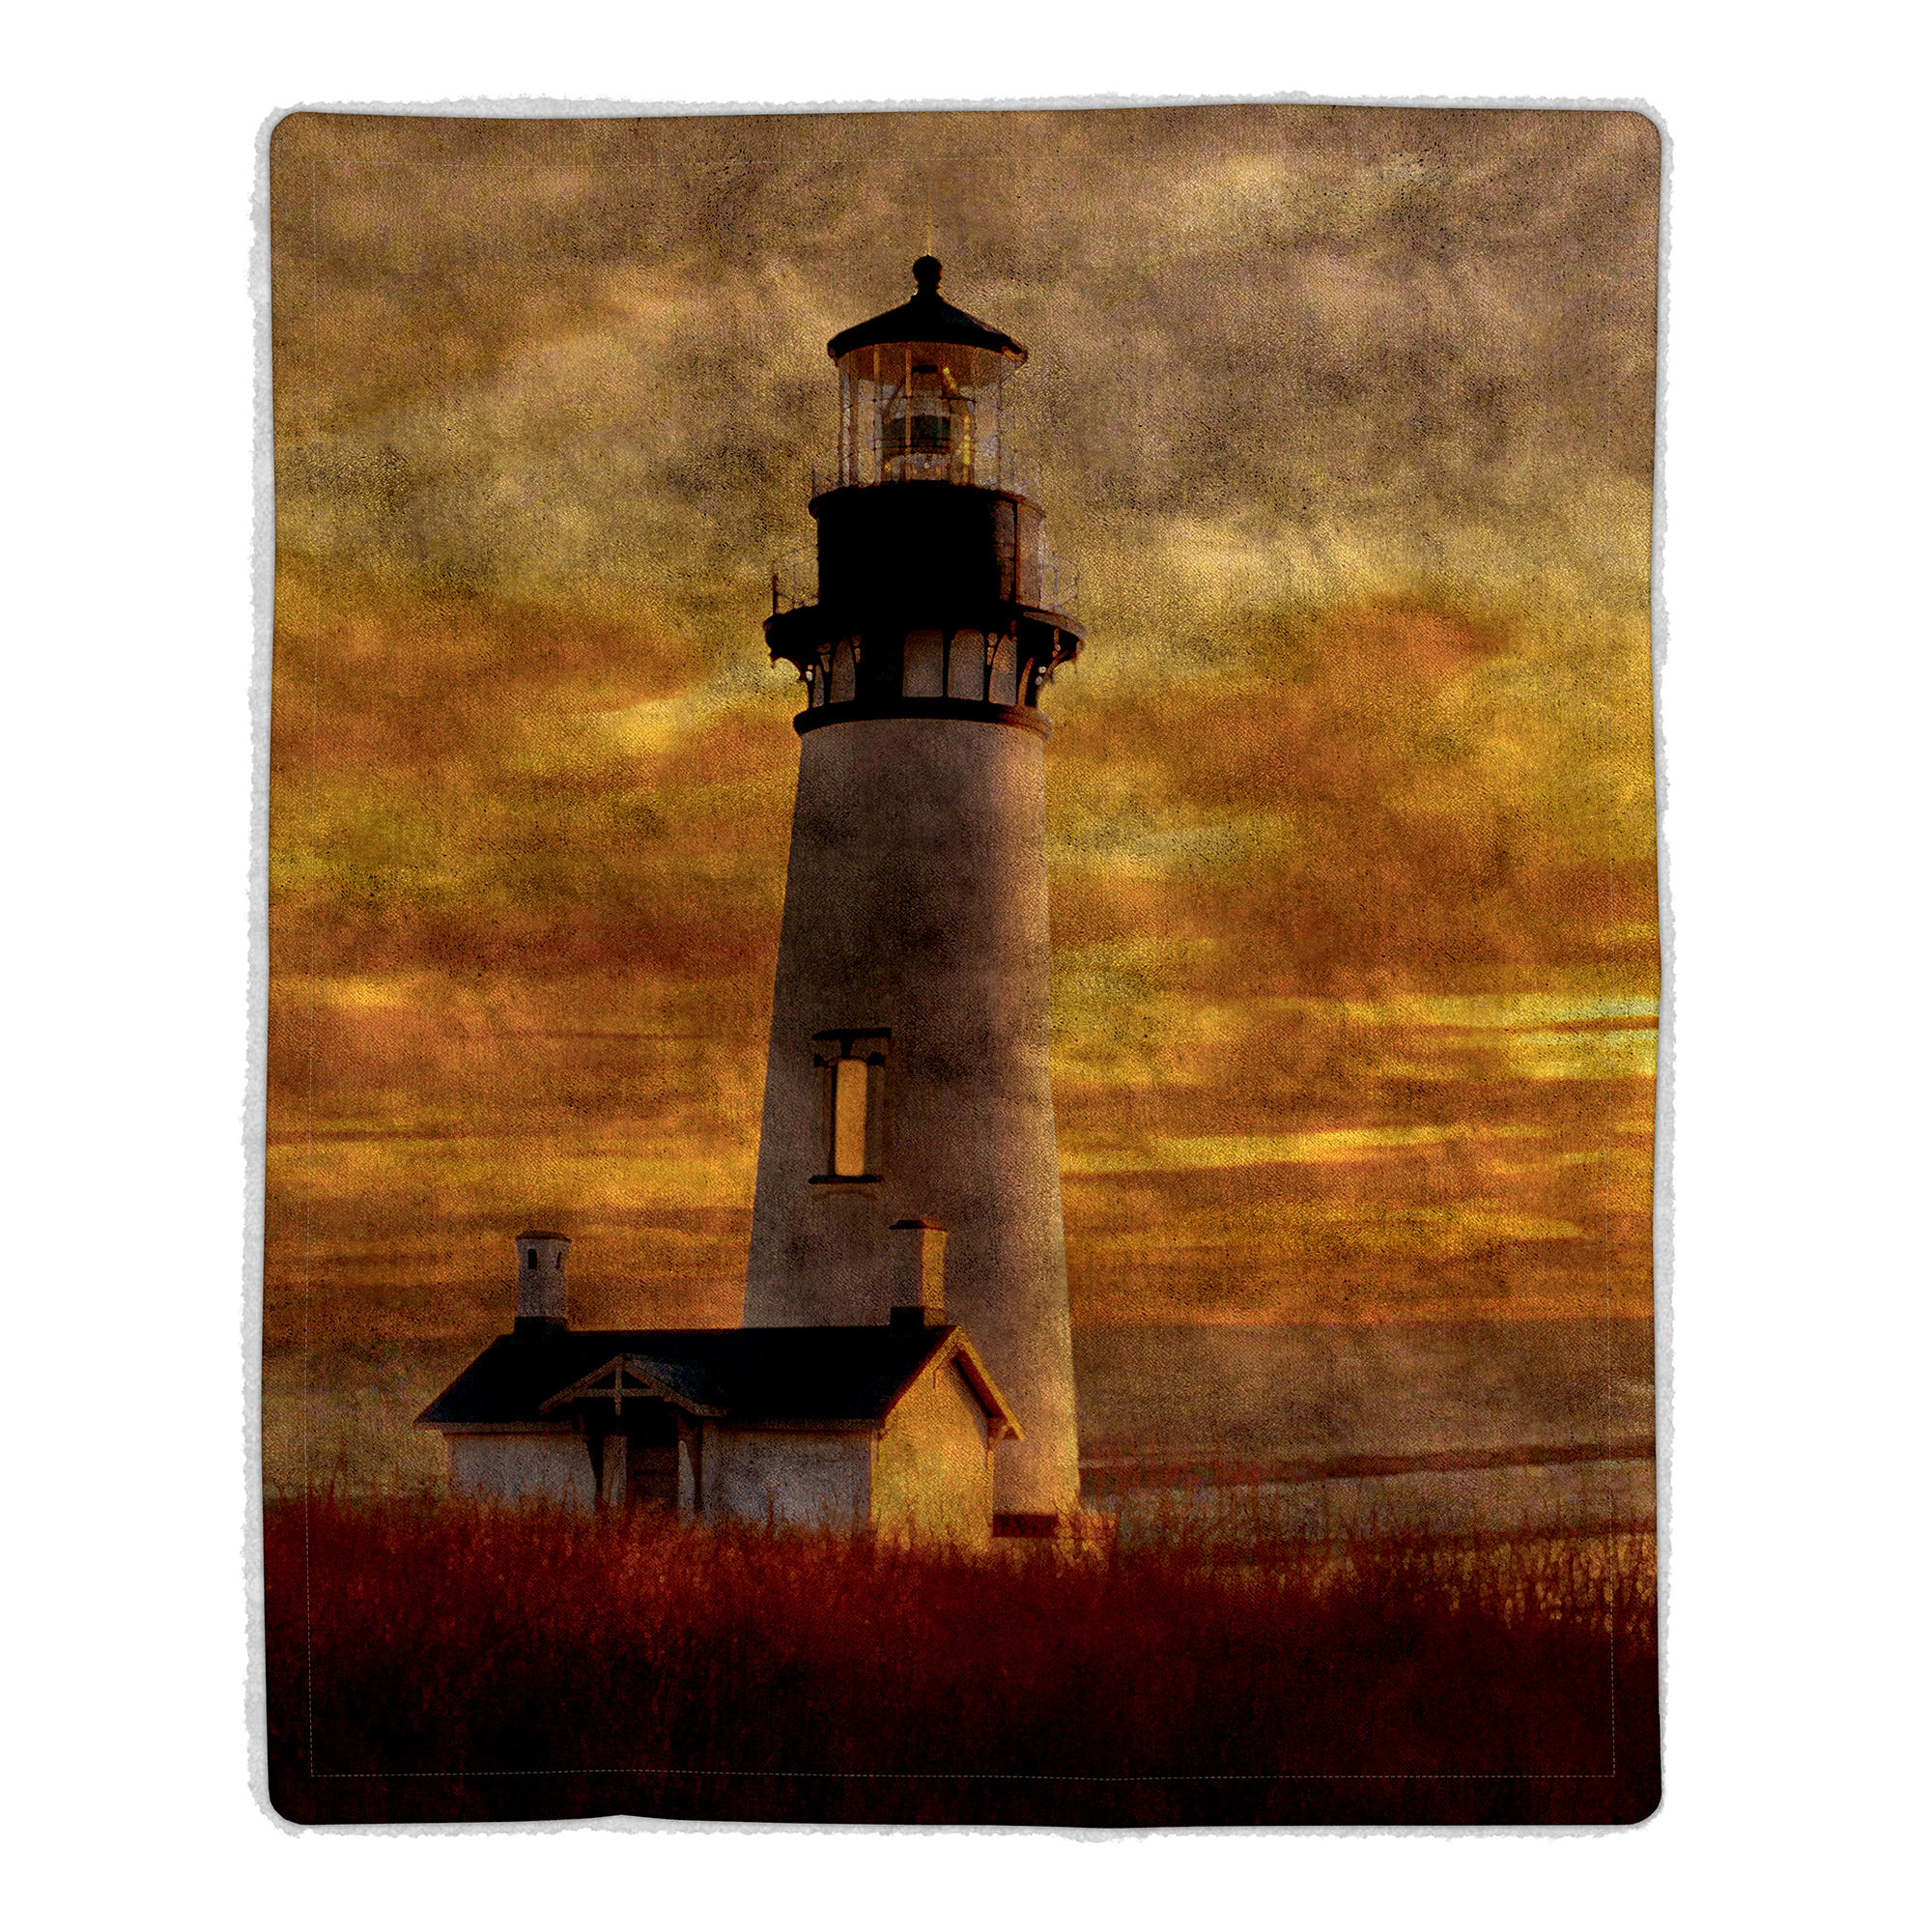 Fluffy Plush Throw Blanket 50 X 60 Inch- Lighthouse Print Lightweight Hypoallergenic Bed Or Couch Soft Plush